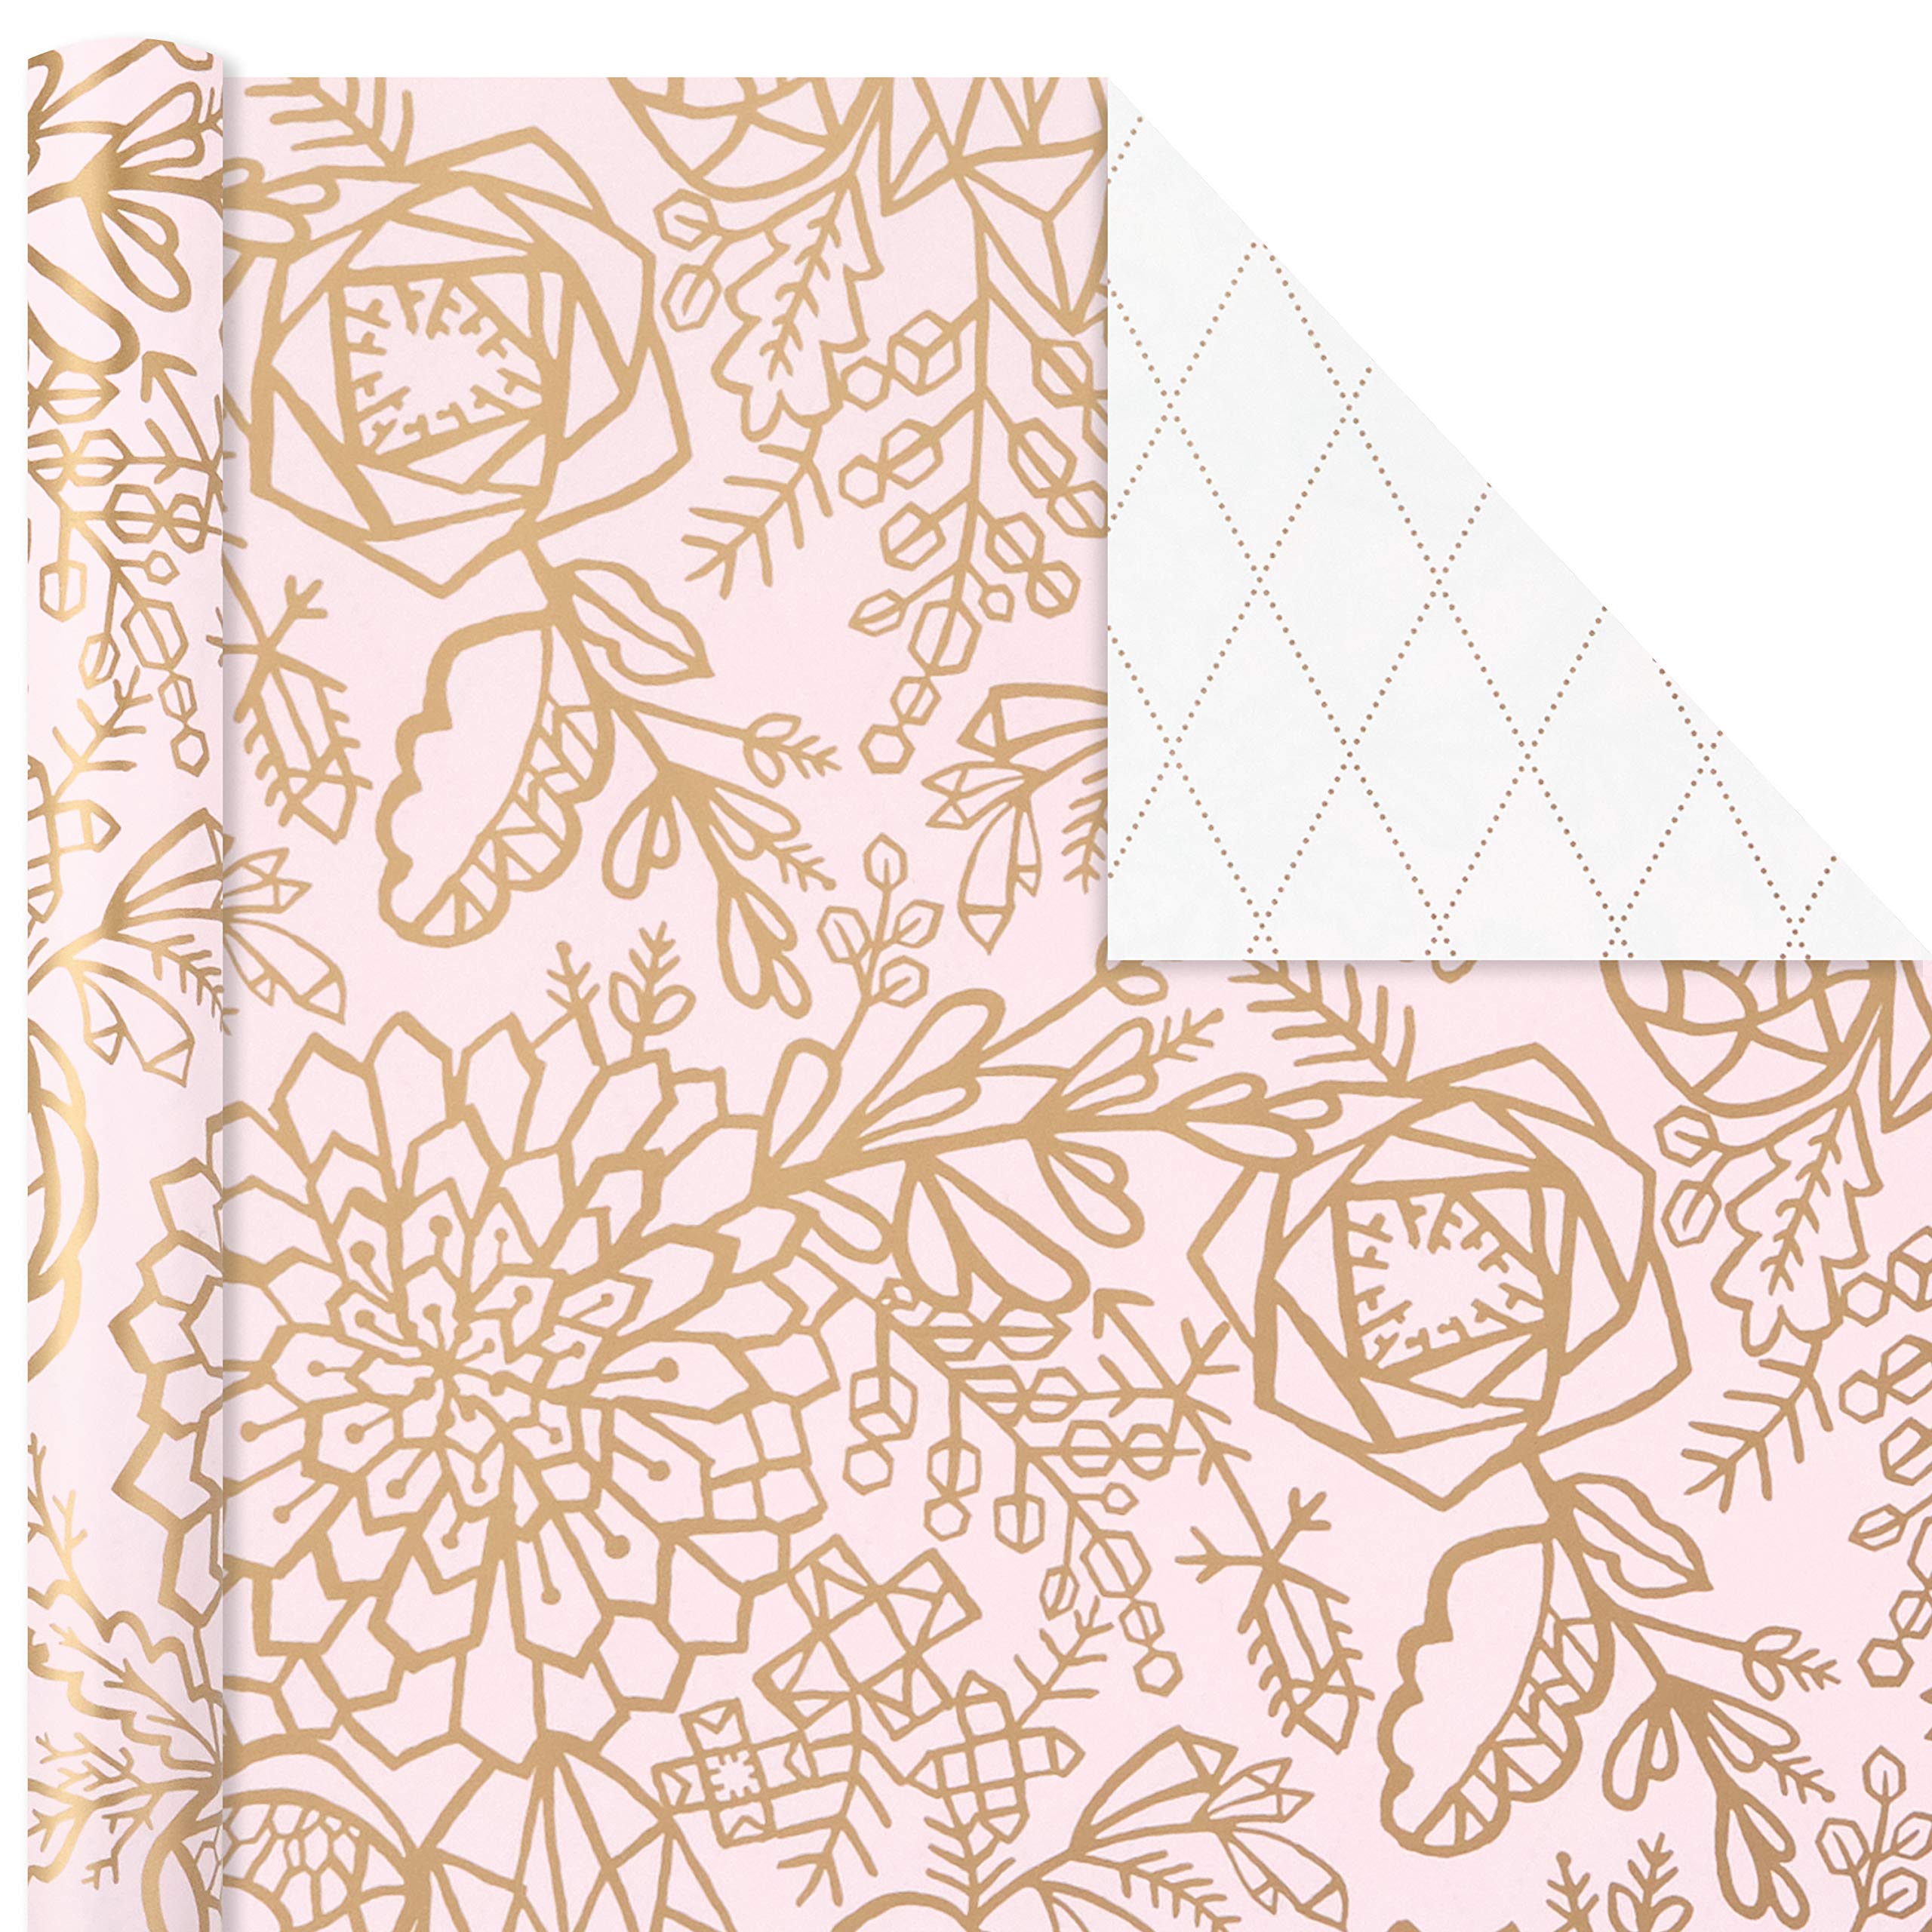 Hallmark All Occasion Reversible Wrapping Paper Bundle - Pastel & Metallic Celebrate (3-Pack: 75 sq. ft. ttl.) for Mother's Day, Weddings, Birthdays, Baby Showers, Bridal Showers or Any Occasion